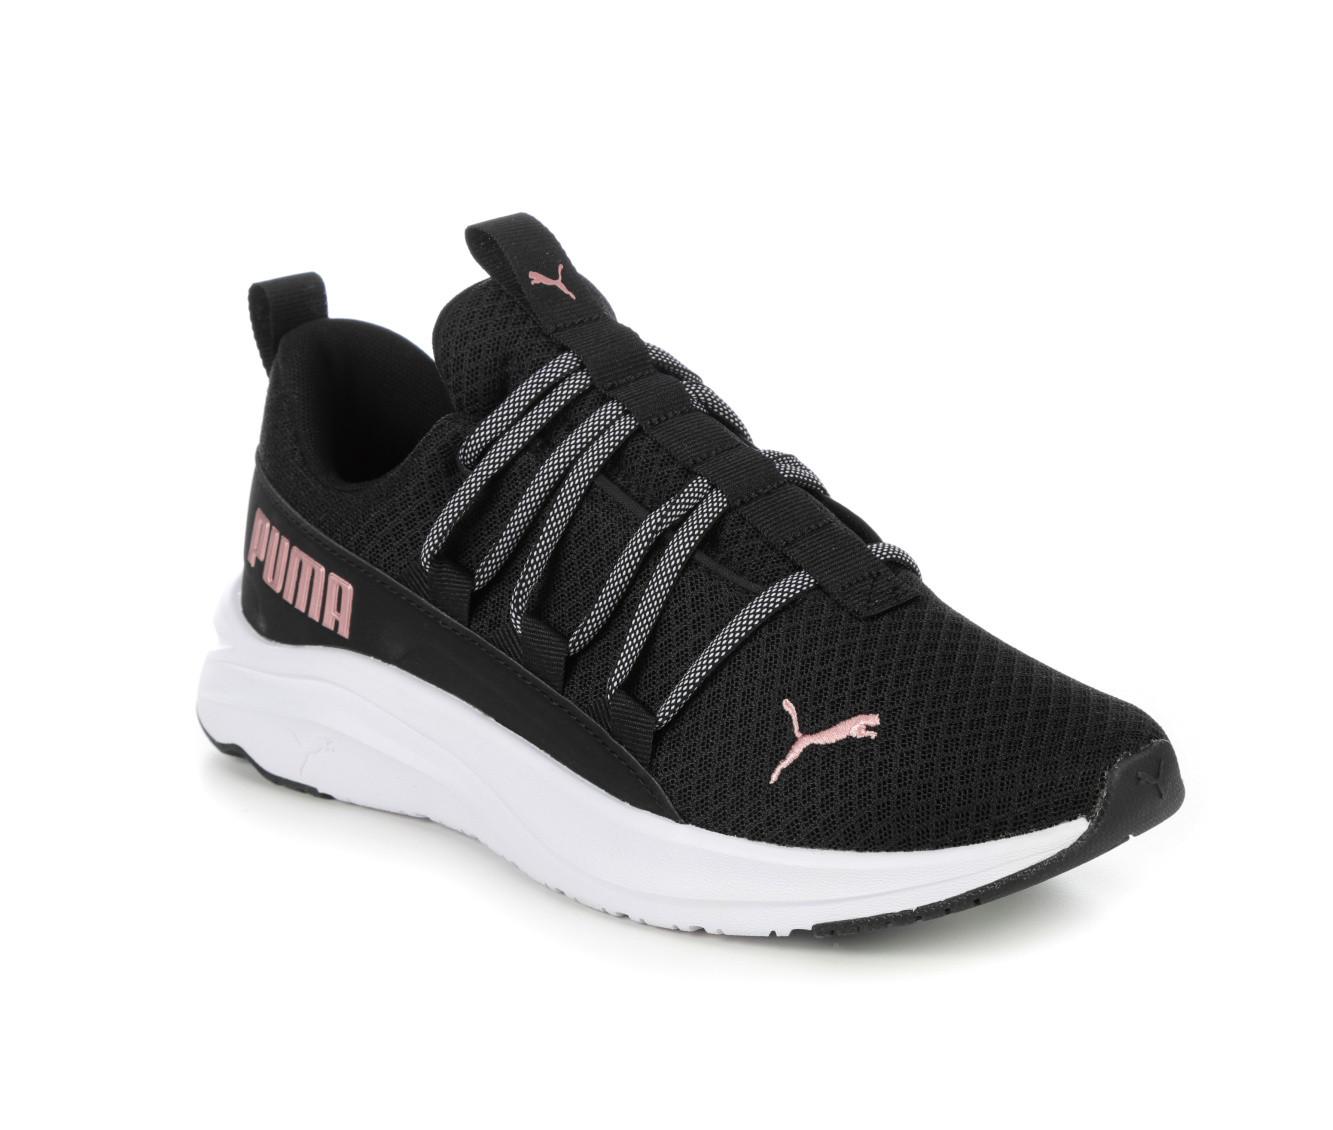 Women's Puma One 4 All Sneakers